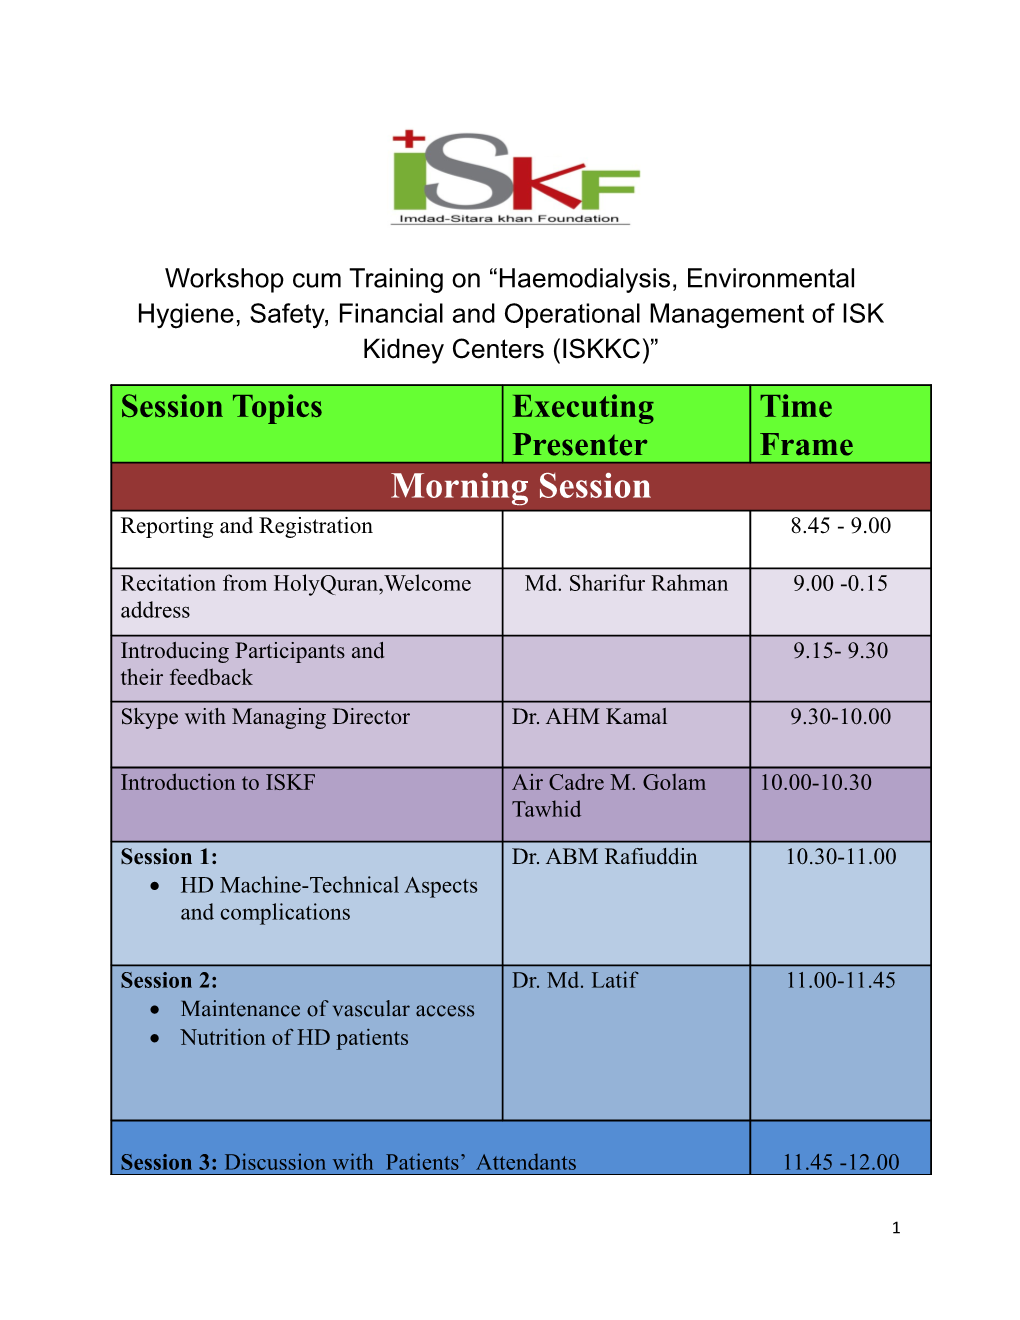 Workshop Cum Training on Haemodialysis, Environmental Hygiene, Safety, Financial and Operational